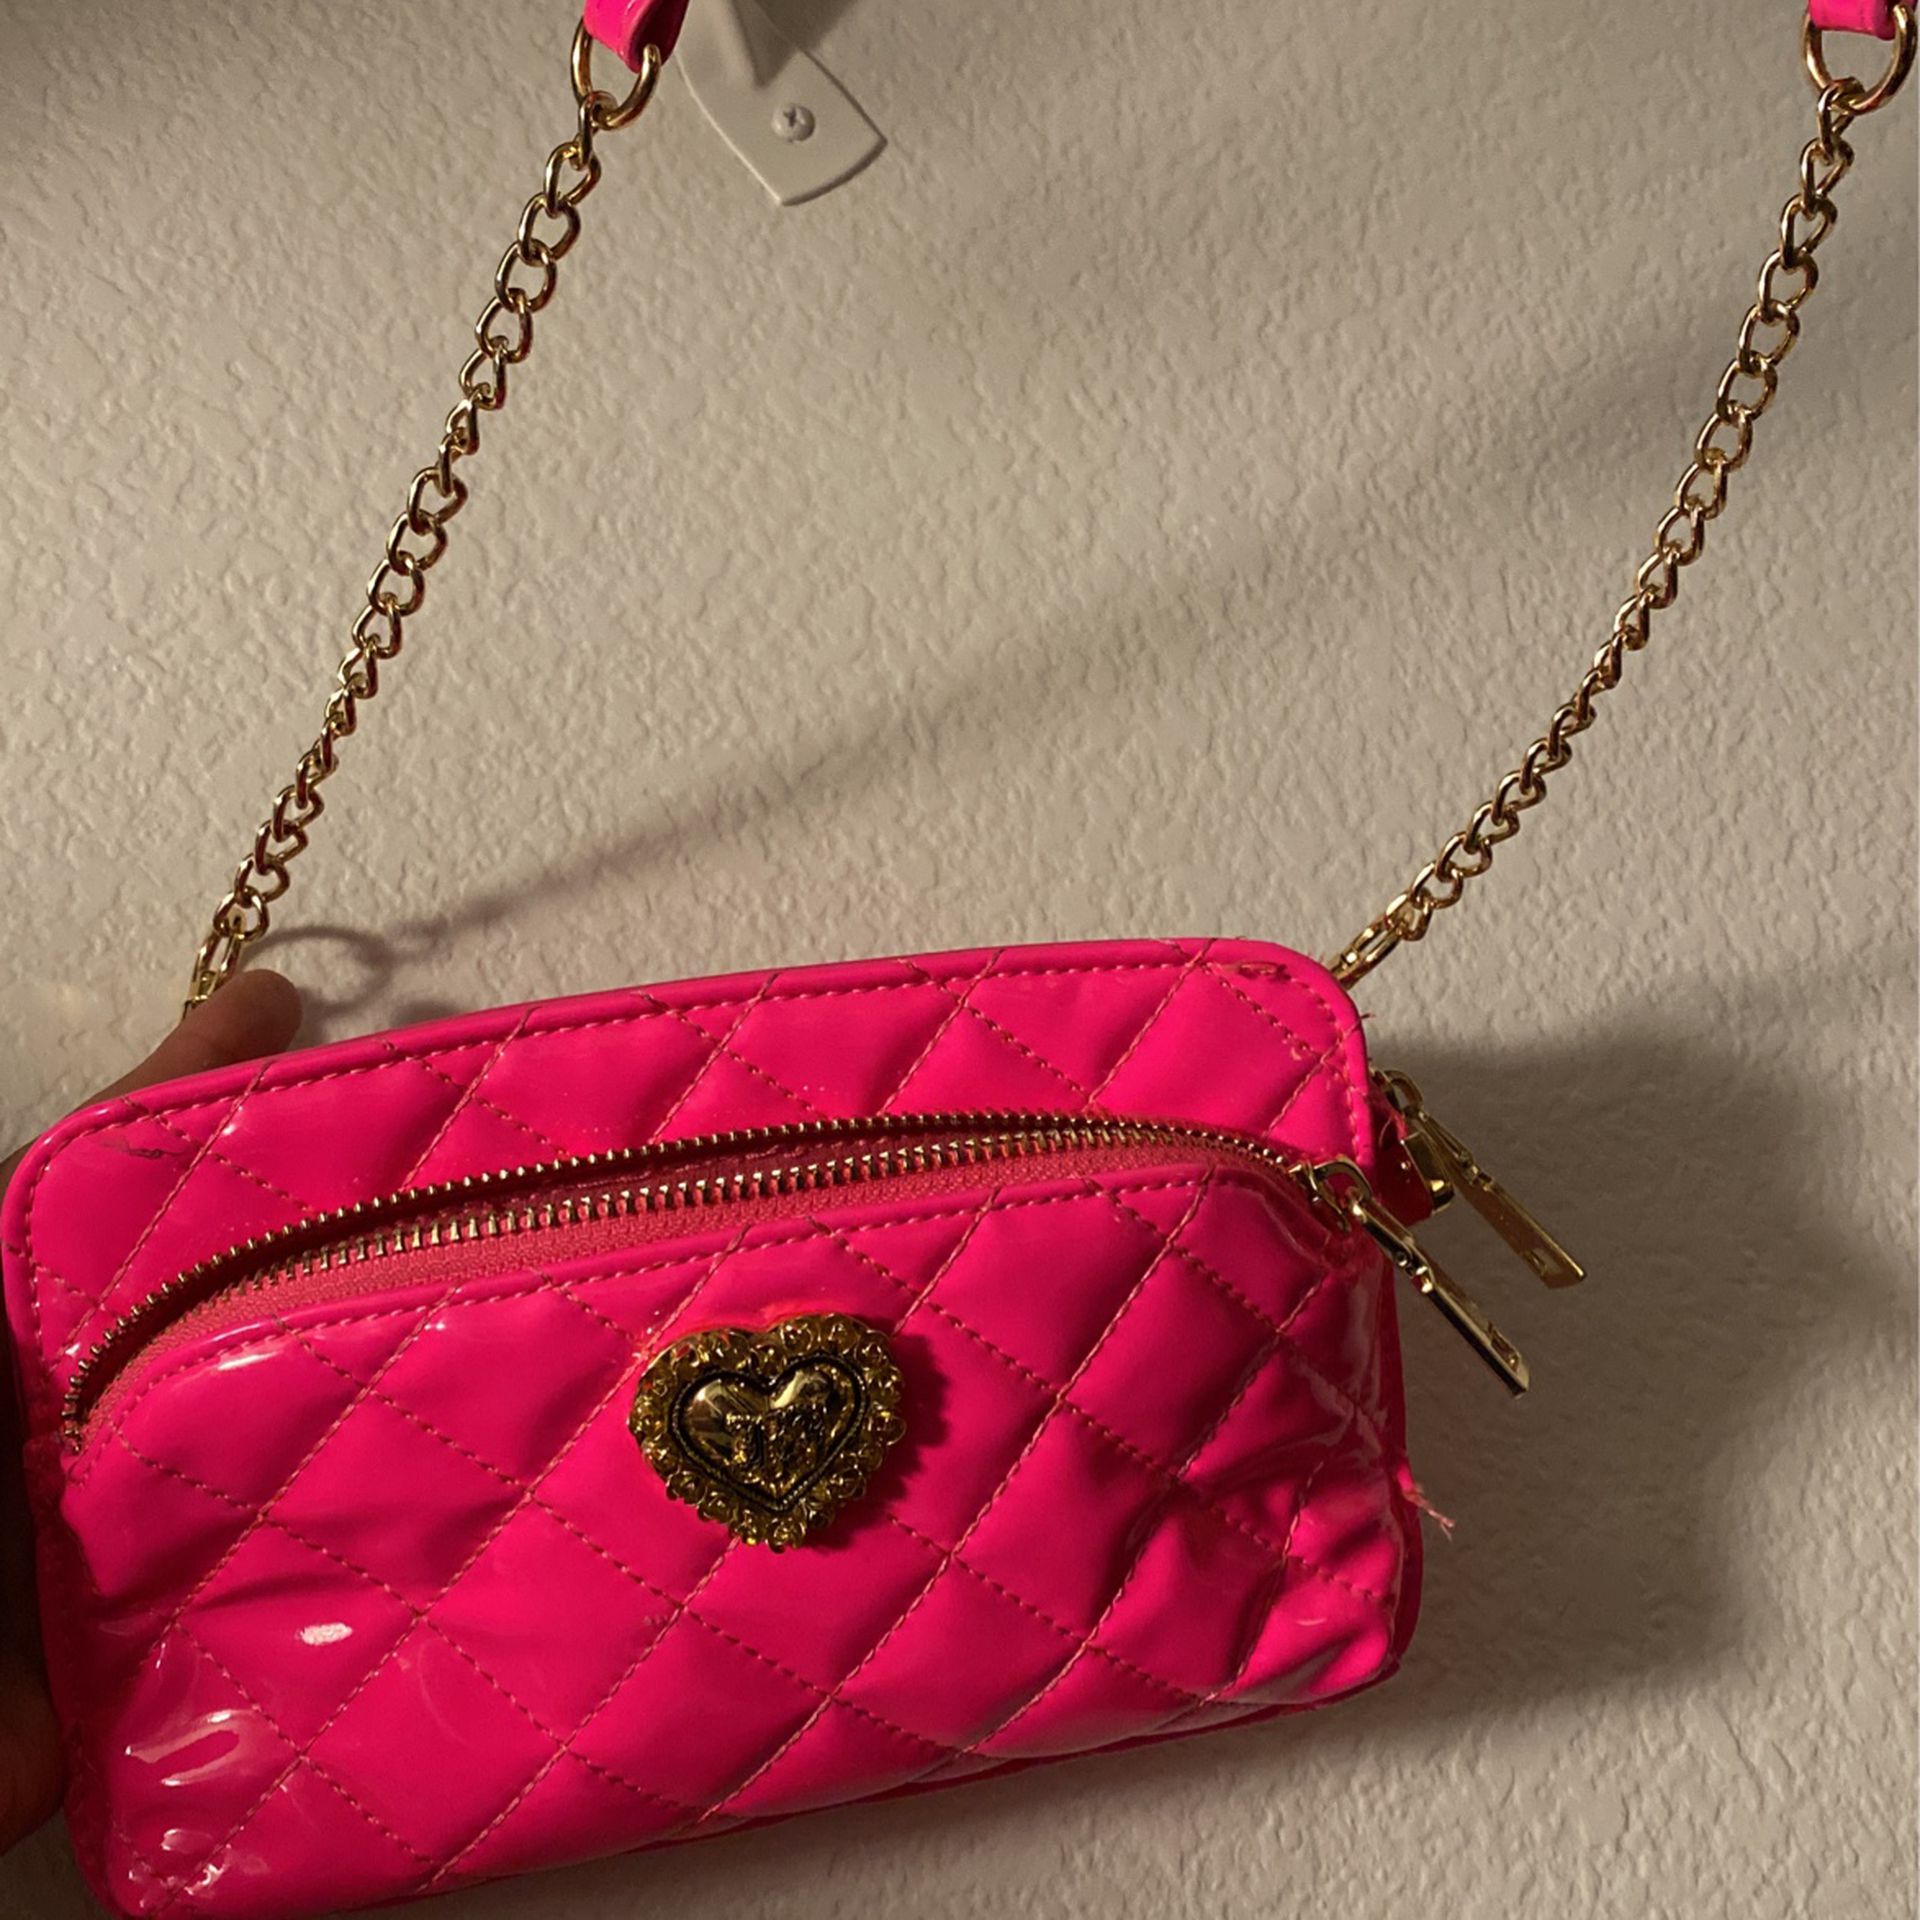 Neon Pink Betsey Johnson Bag for Sale in Henderson, NV - OfferUp